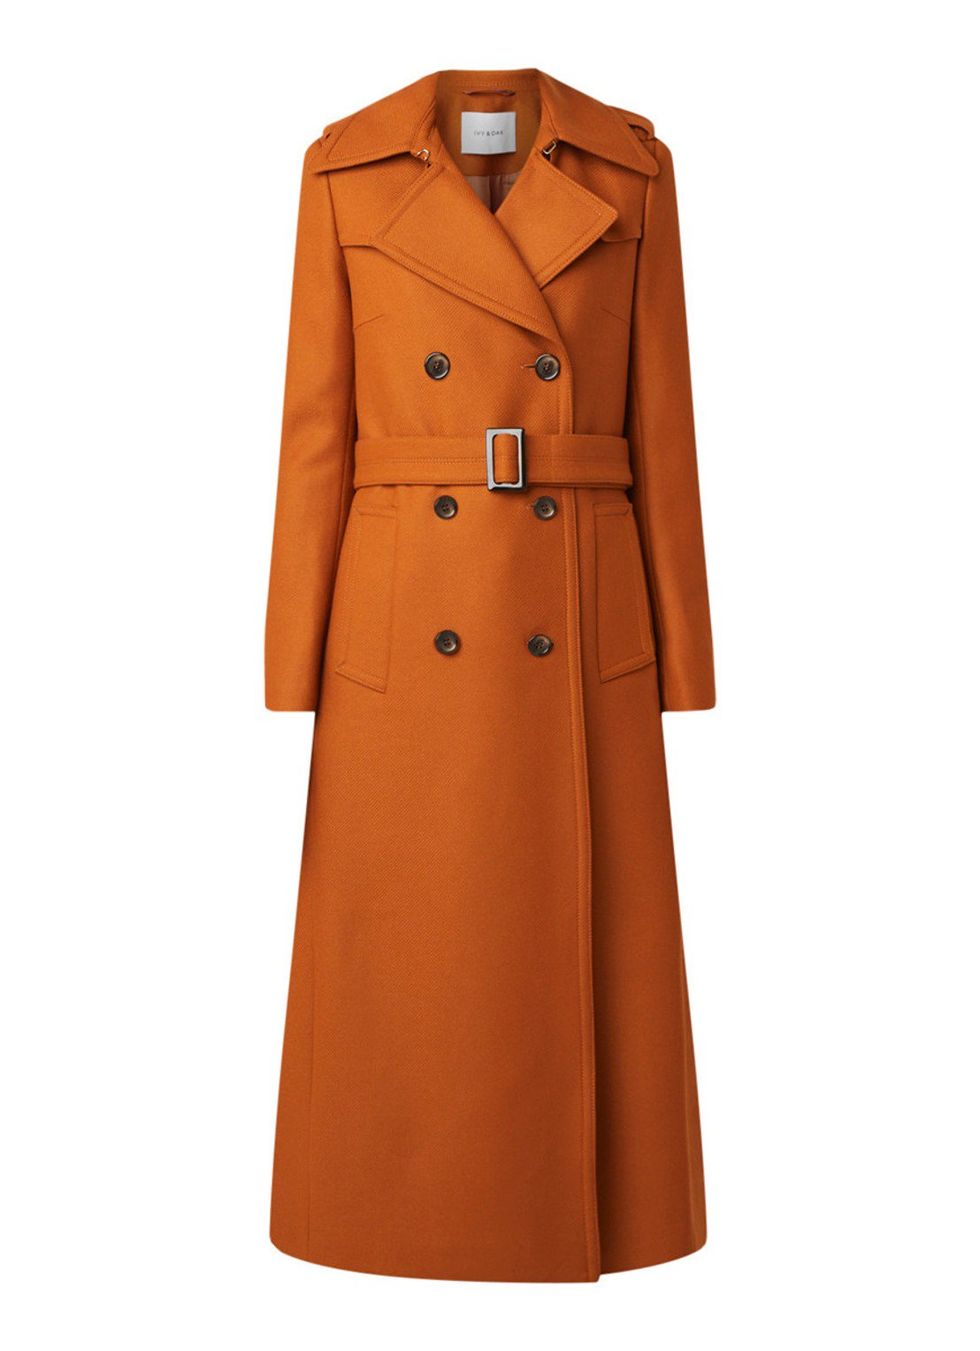 Clothing, Coat, Trench coat, Overcoat, Outerwear, Orange, Sleeve, Duster, Button, Collar, 